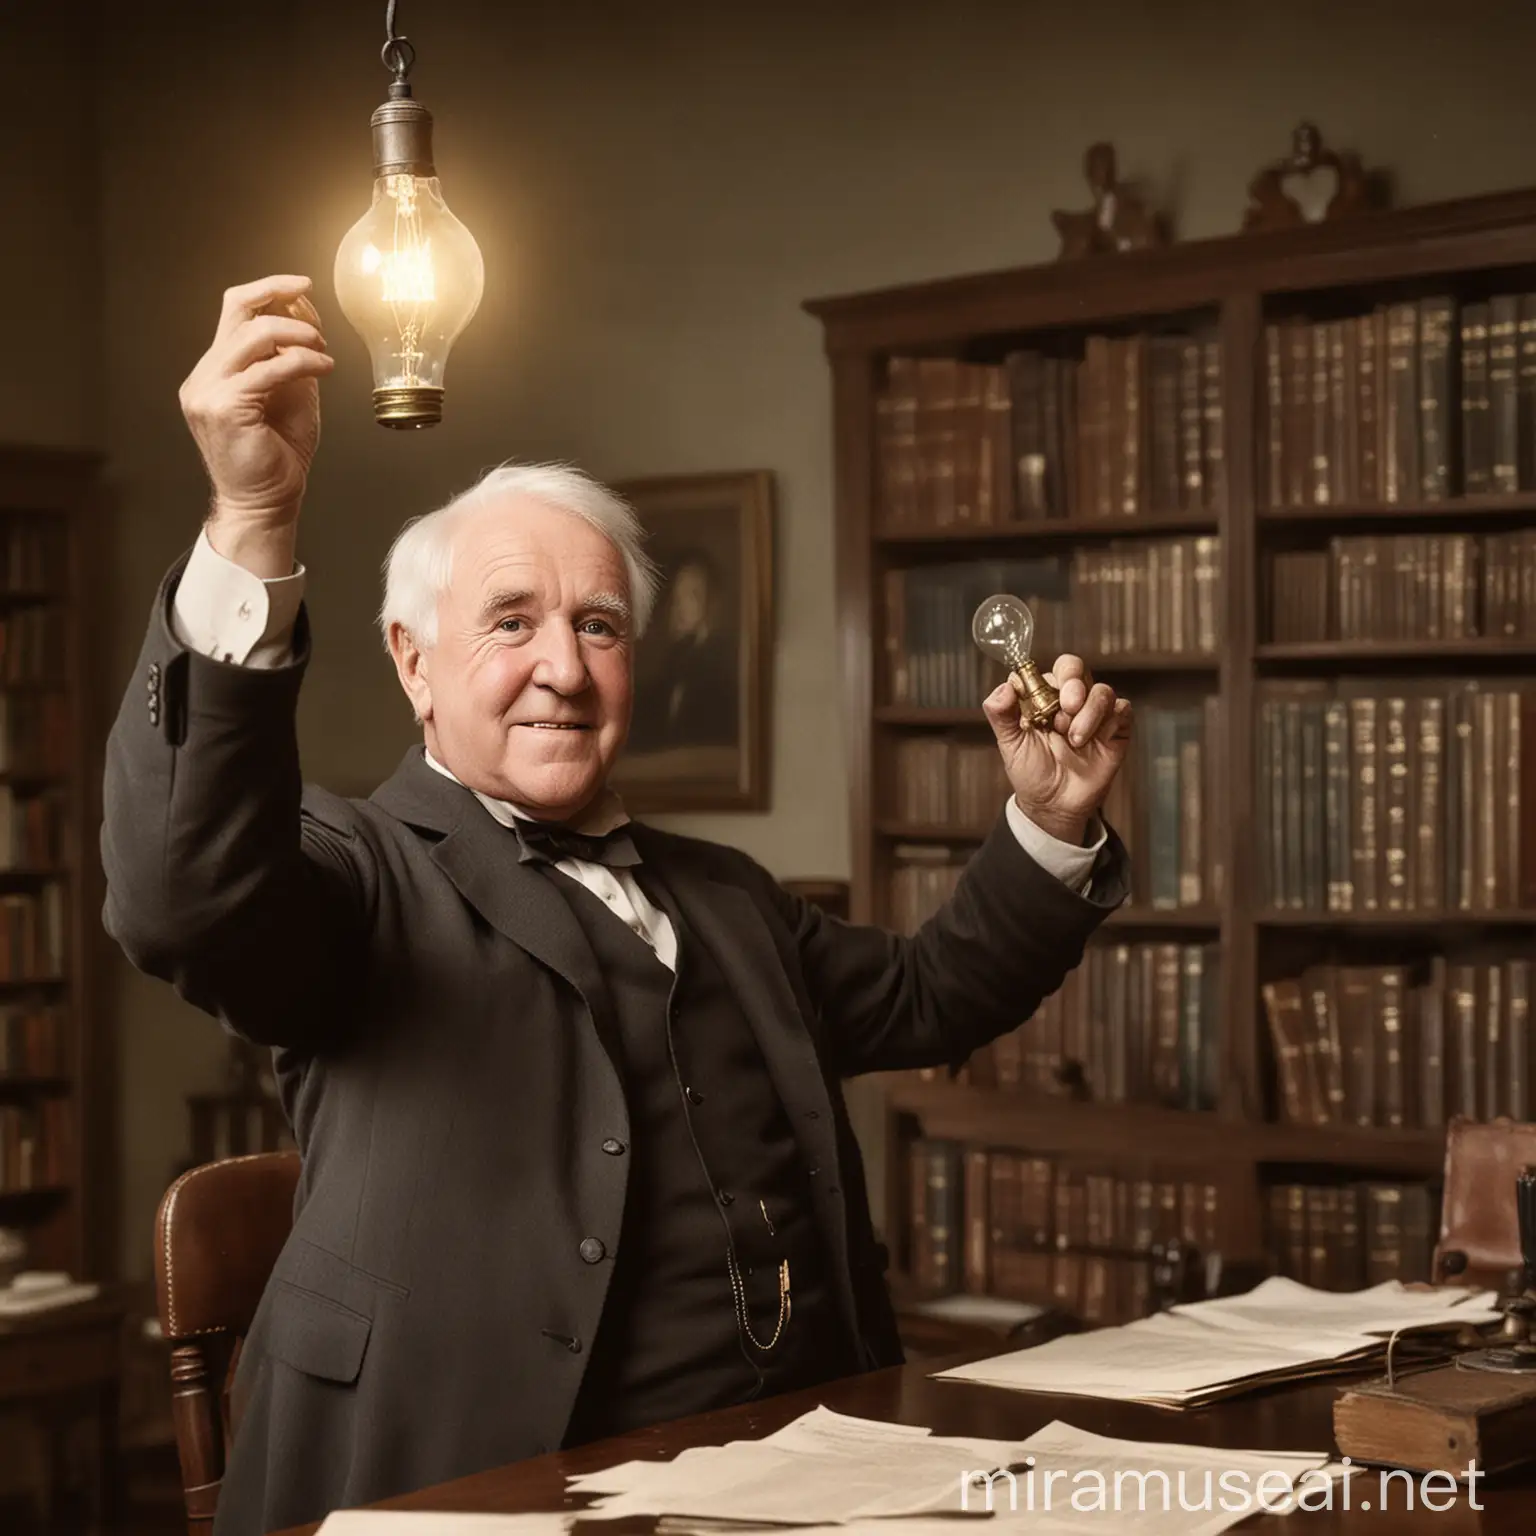 make an image of thomas edison happily holding up a lighbulb in his offfice
